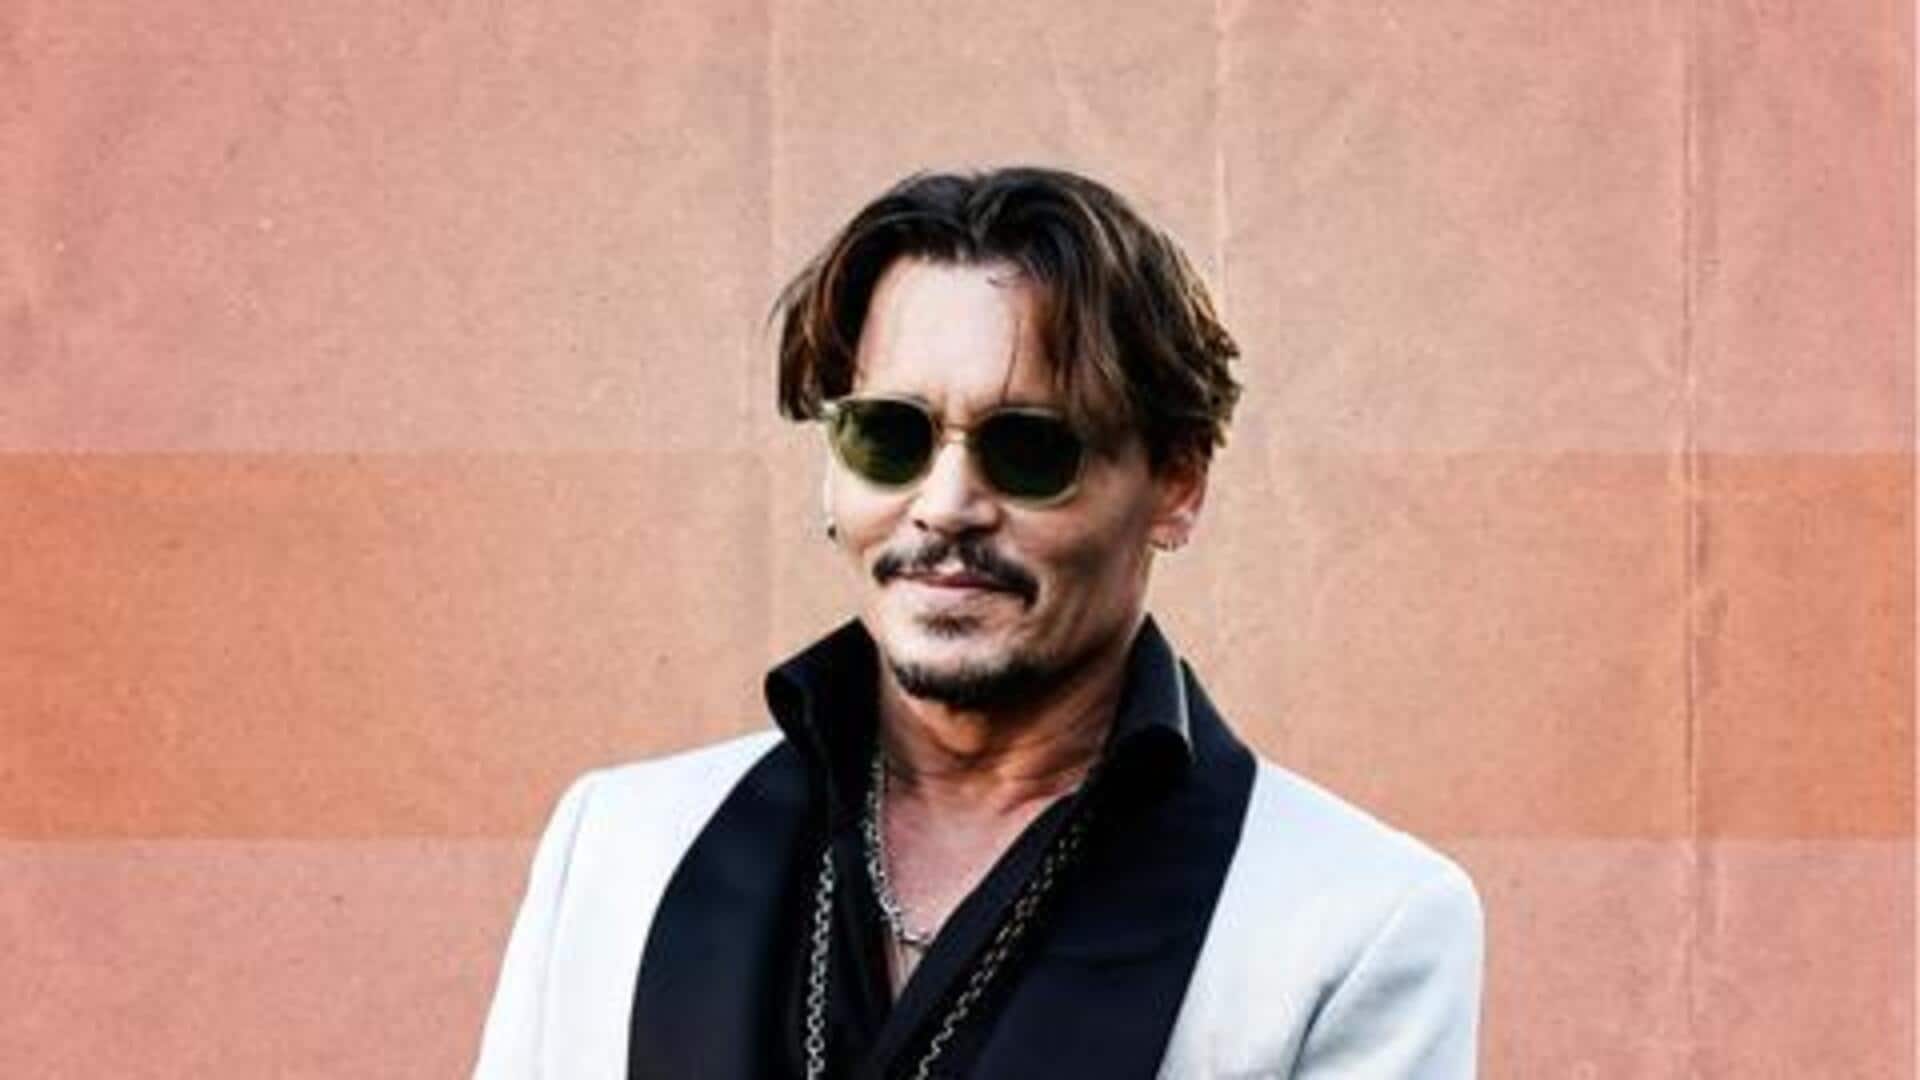 Johnny Depp responds to co-star Lola Glaudini's verbal abuse allegations